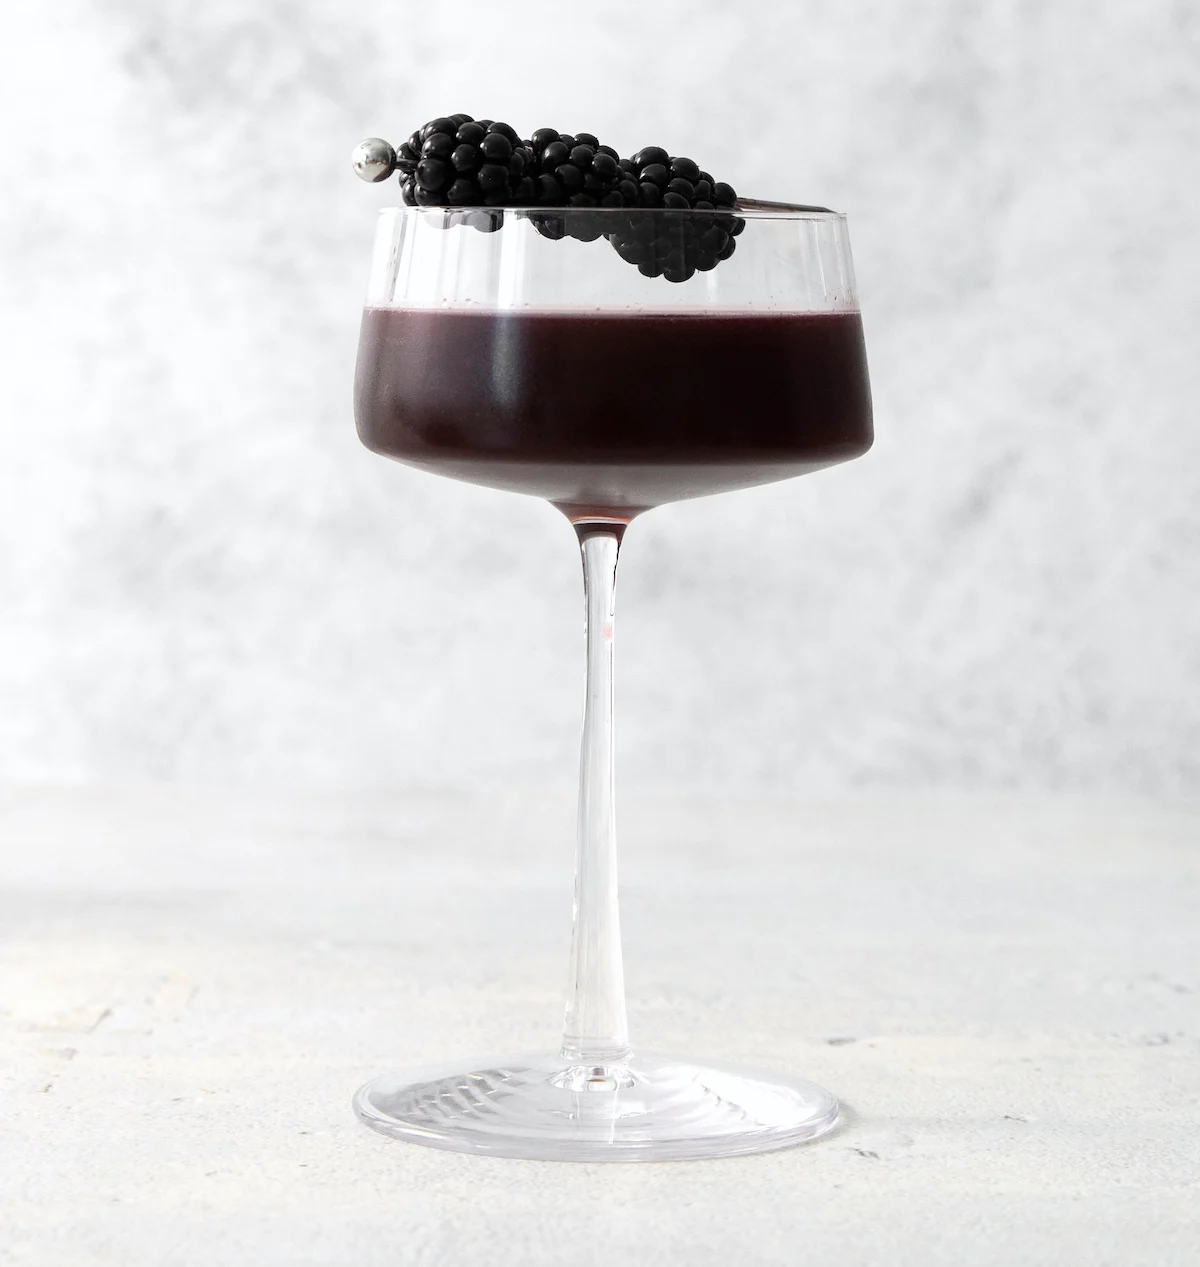 black widow cocktail strained into a glass